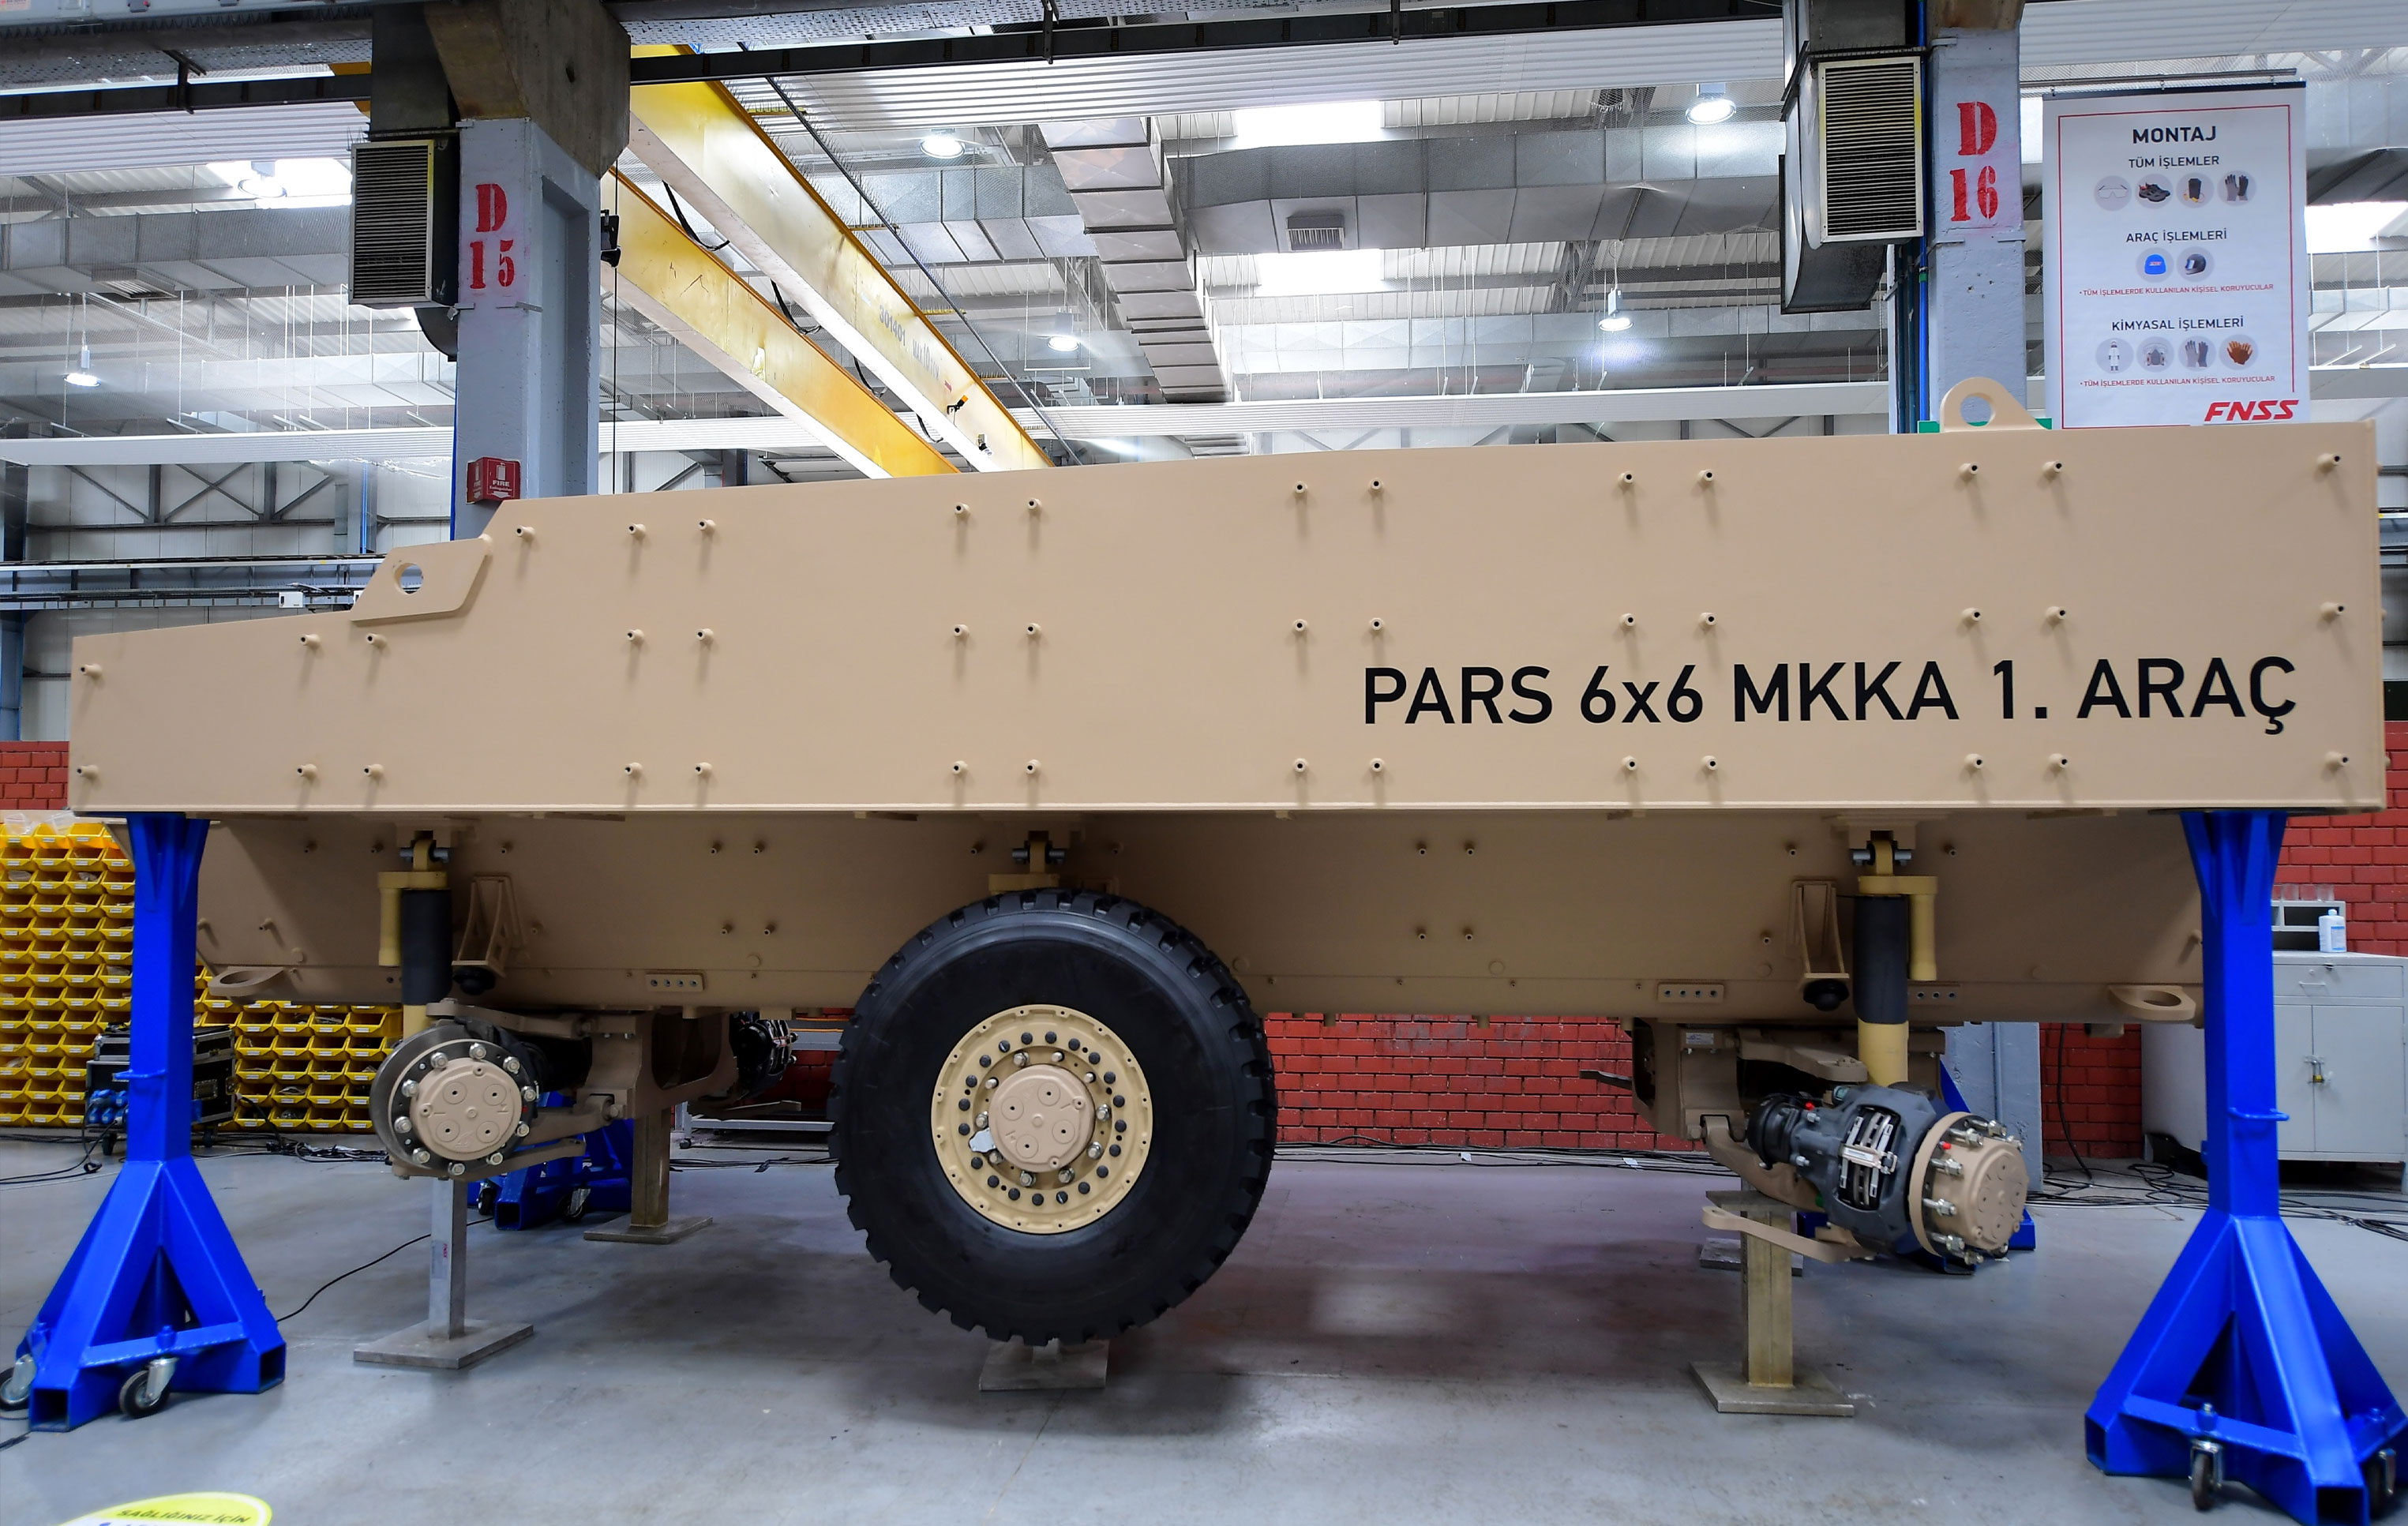 1st Pars 6x6 MMKA being assembled at FNSS facilities